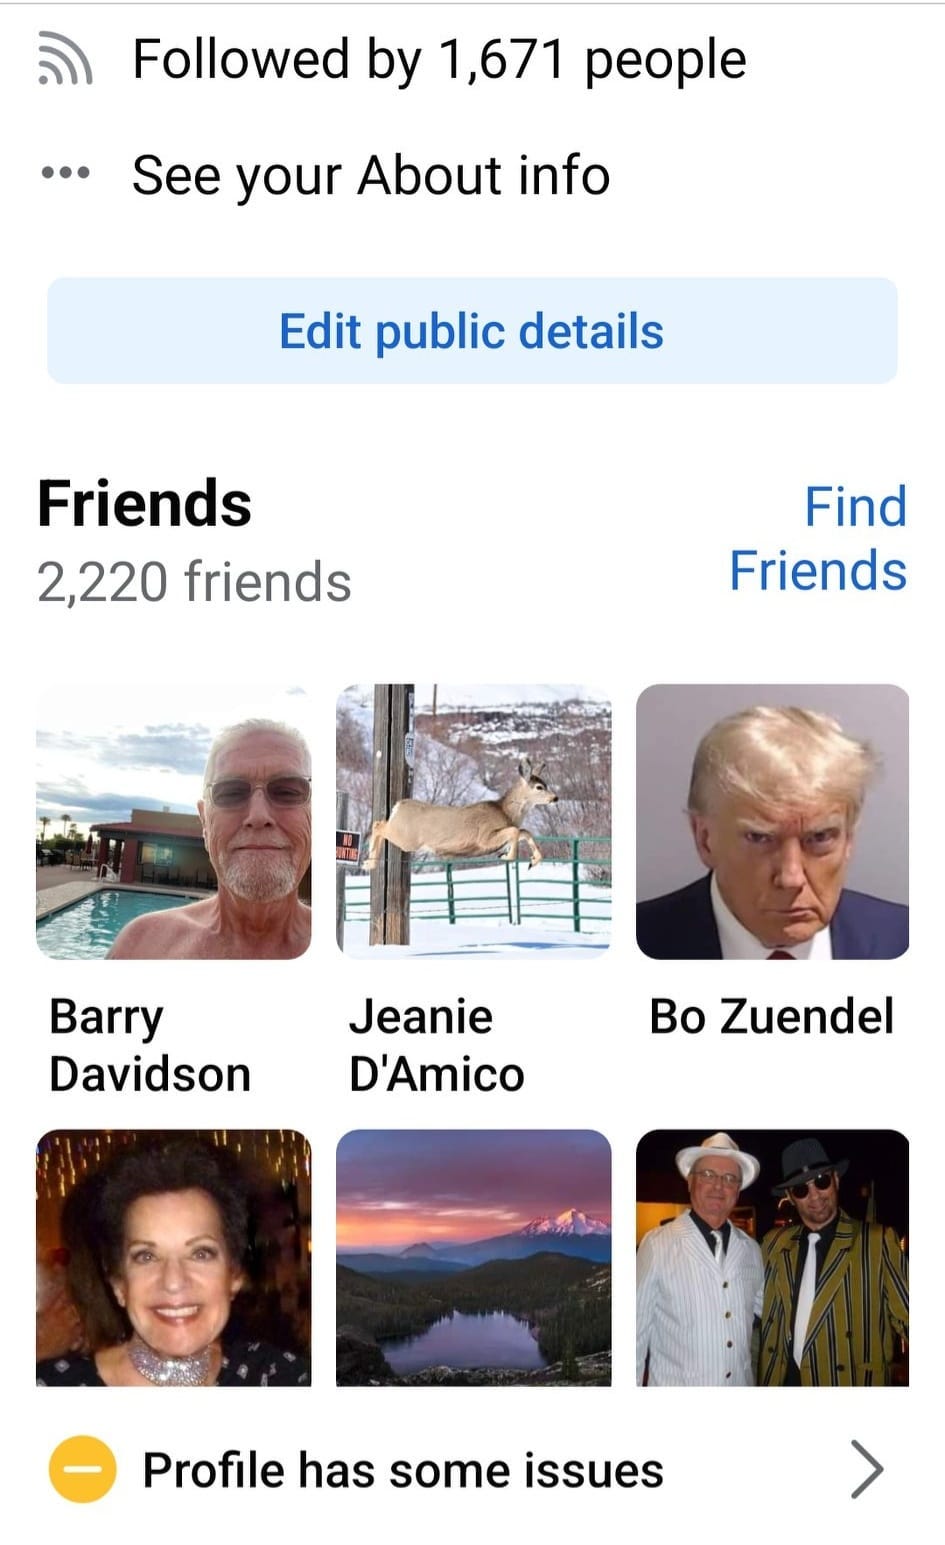 May be an image of ‎5 people, blonde hair and ‎text that says '‎اه Followed by 1,671 people ...See your About info Edit public details Friends 2,220 friends Find Friends Barry Davidson Jeanie D'Amico Bo Zuendel Profile has some issues‎'‎‎